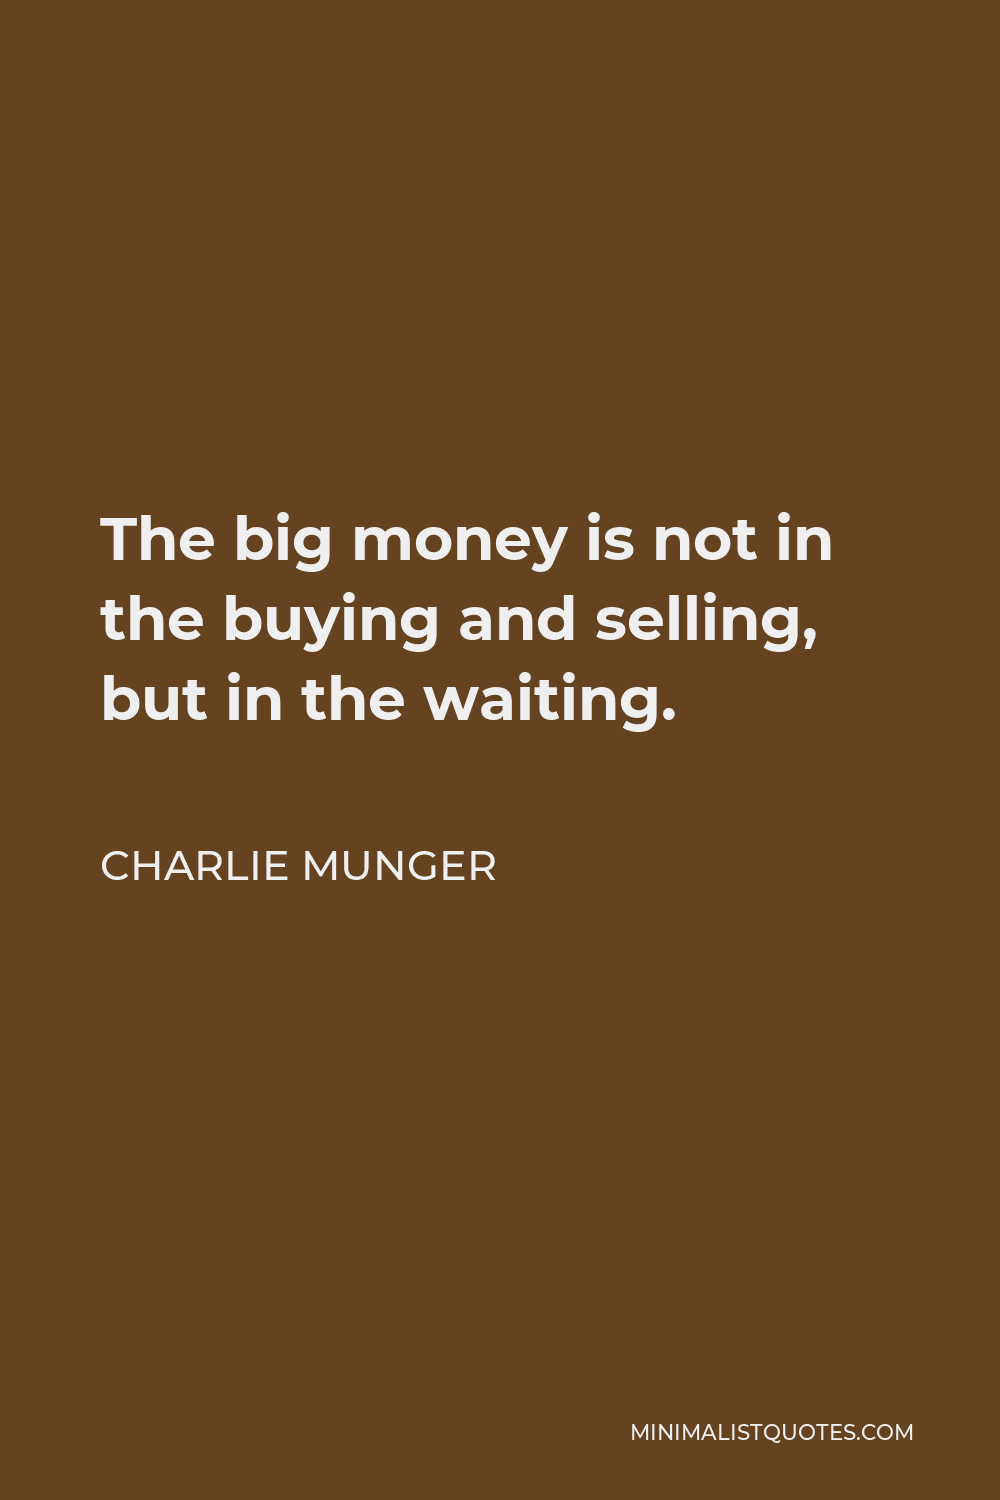 Charlie Munger Quote - The big money is not in the buying and selling, but in the waiting.